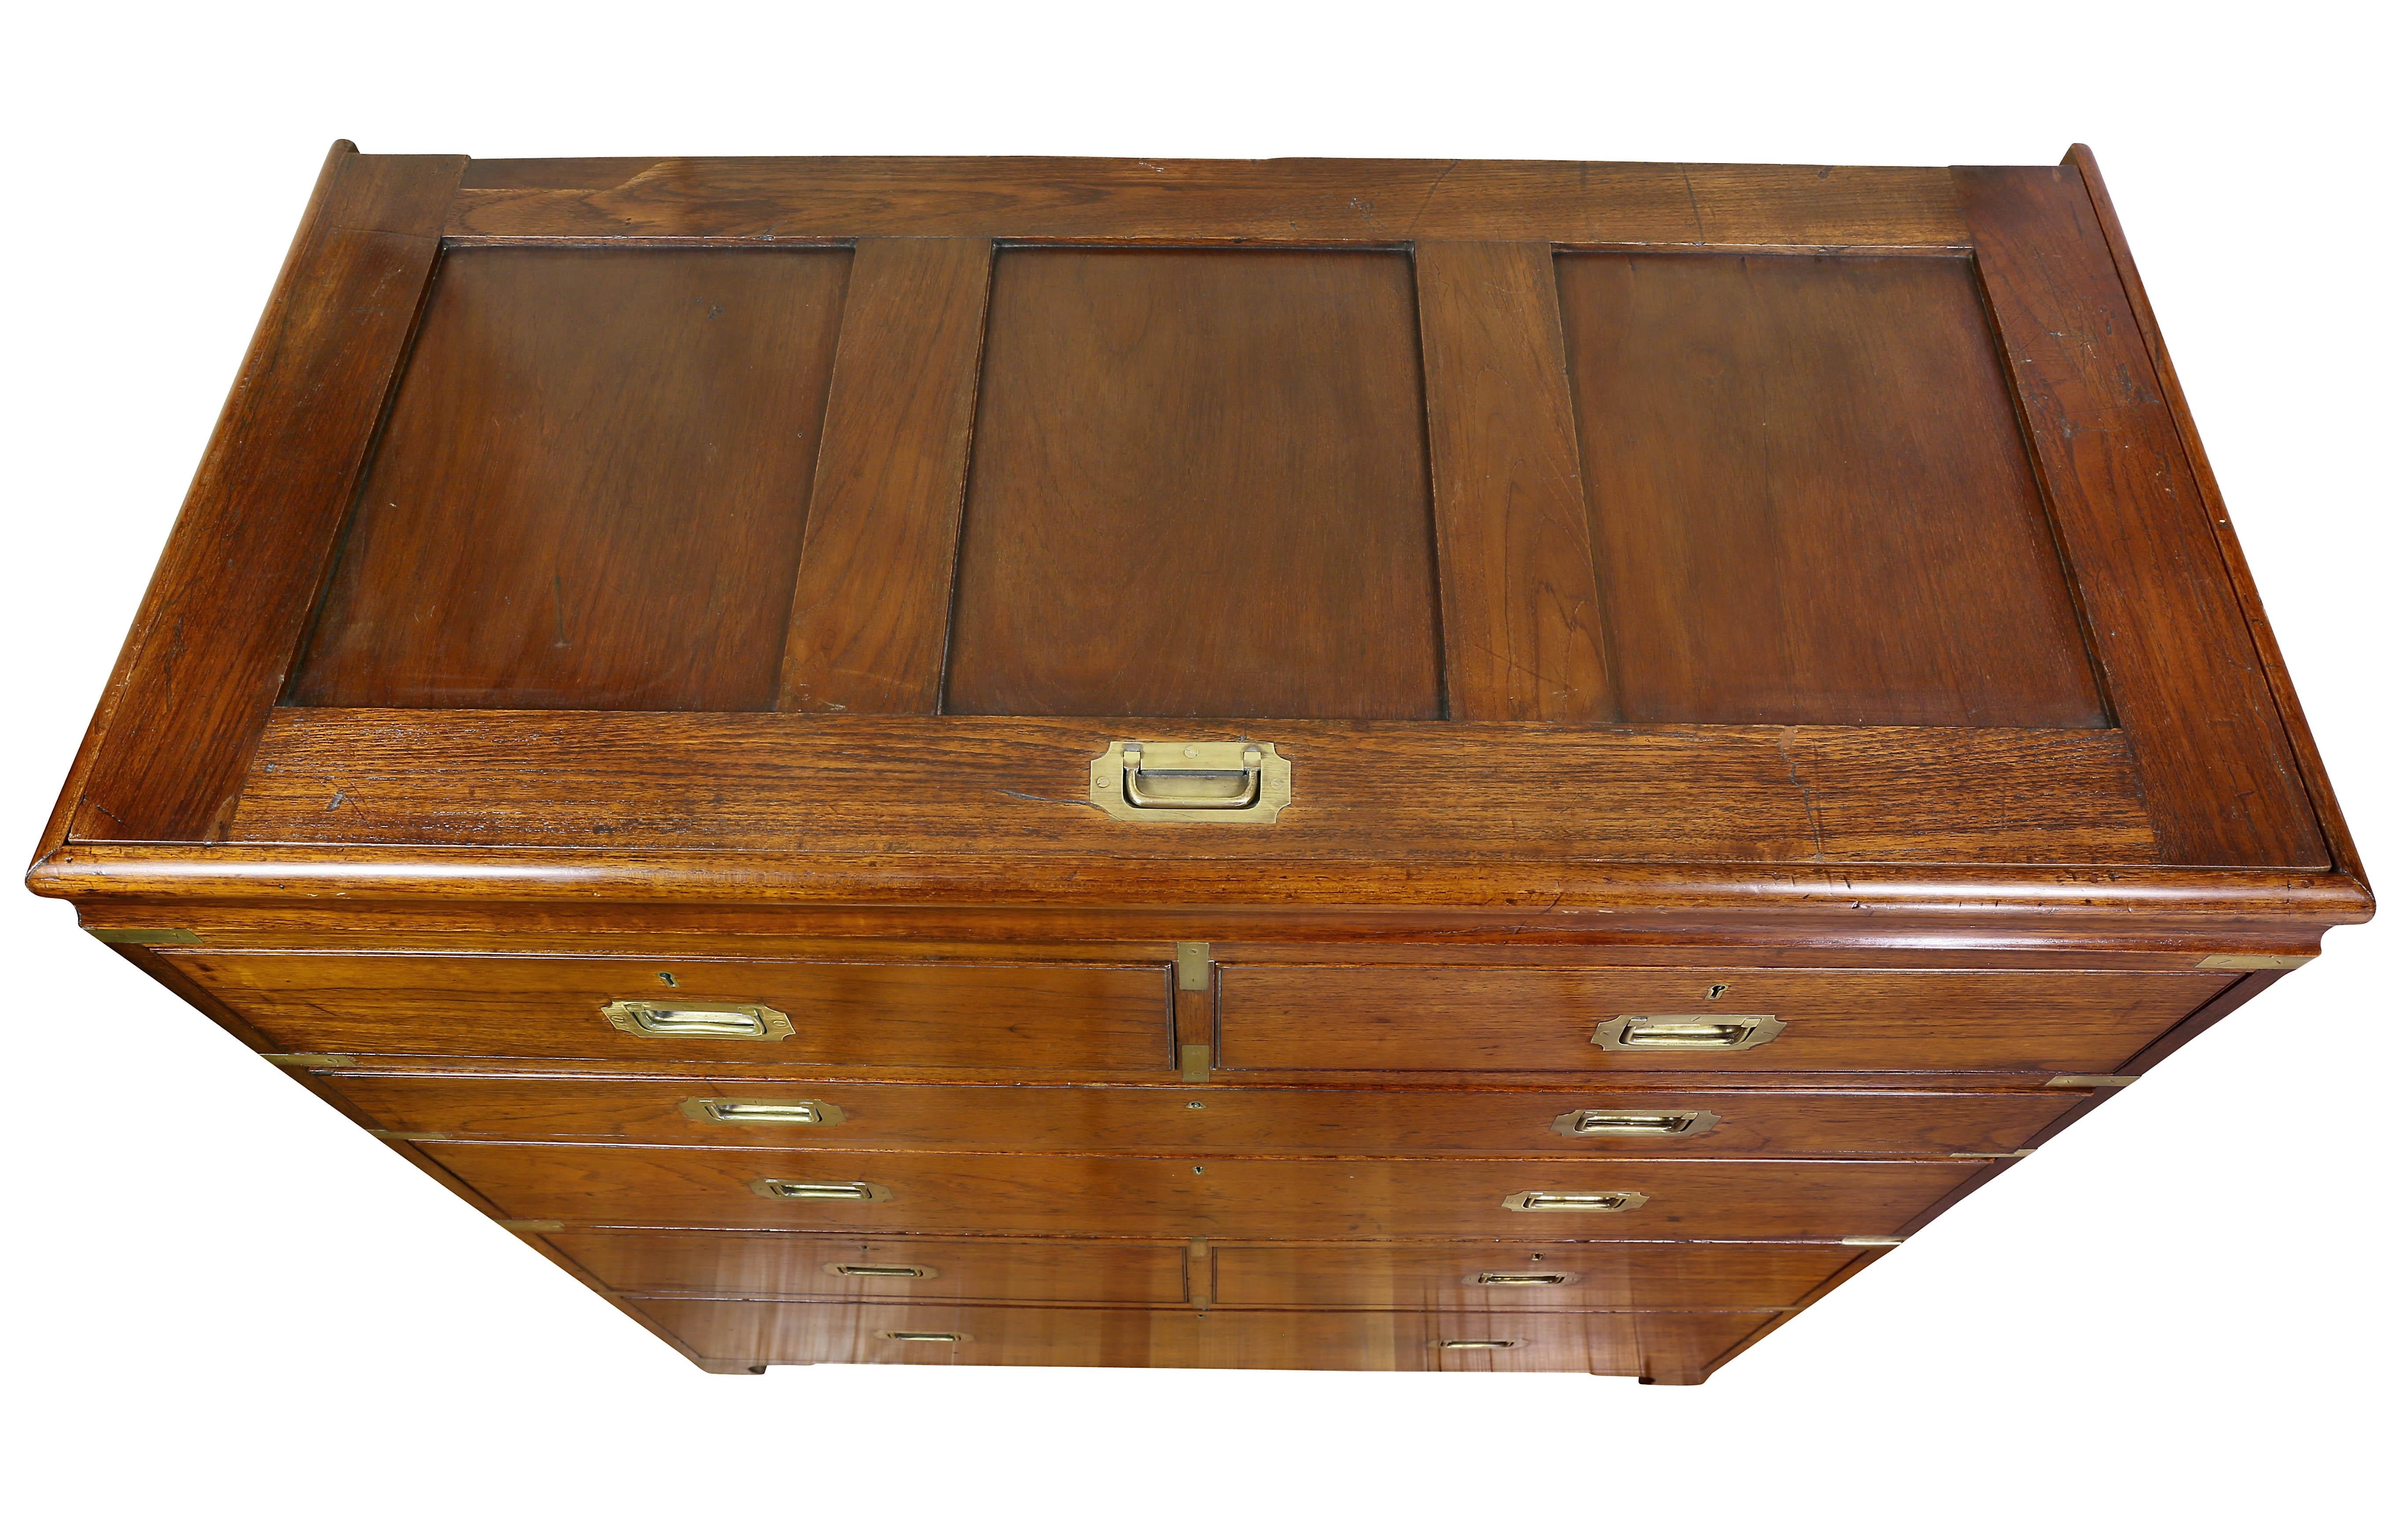 English Regency Teakwood and Brass-Mounted Campaign Chest